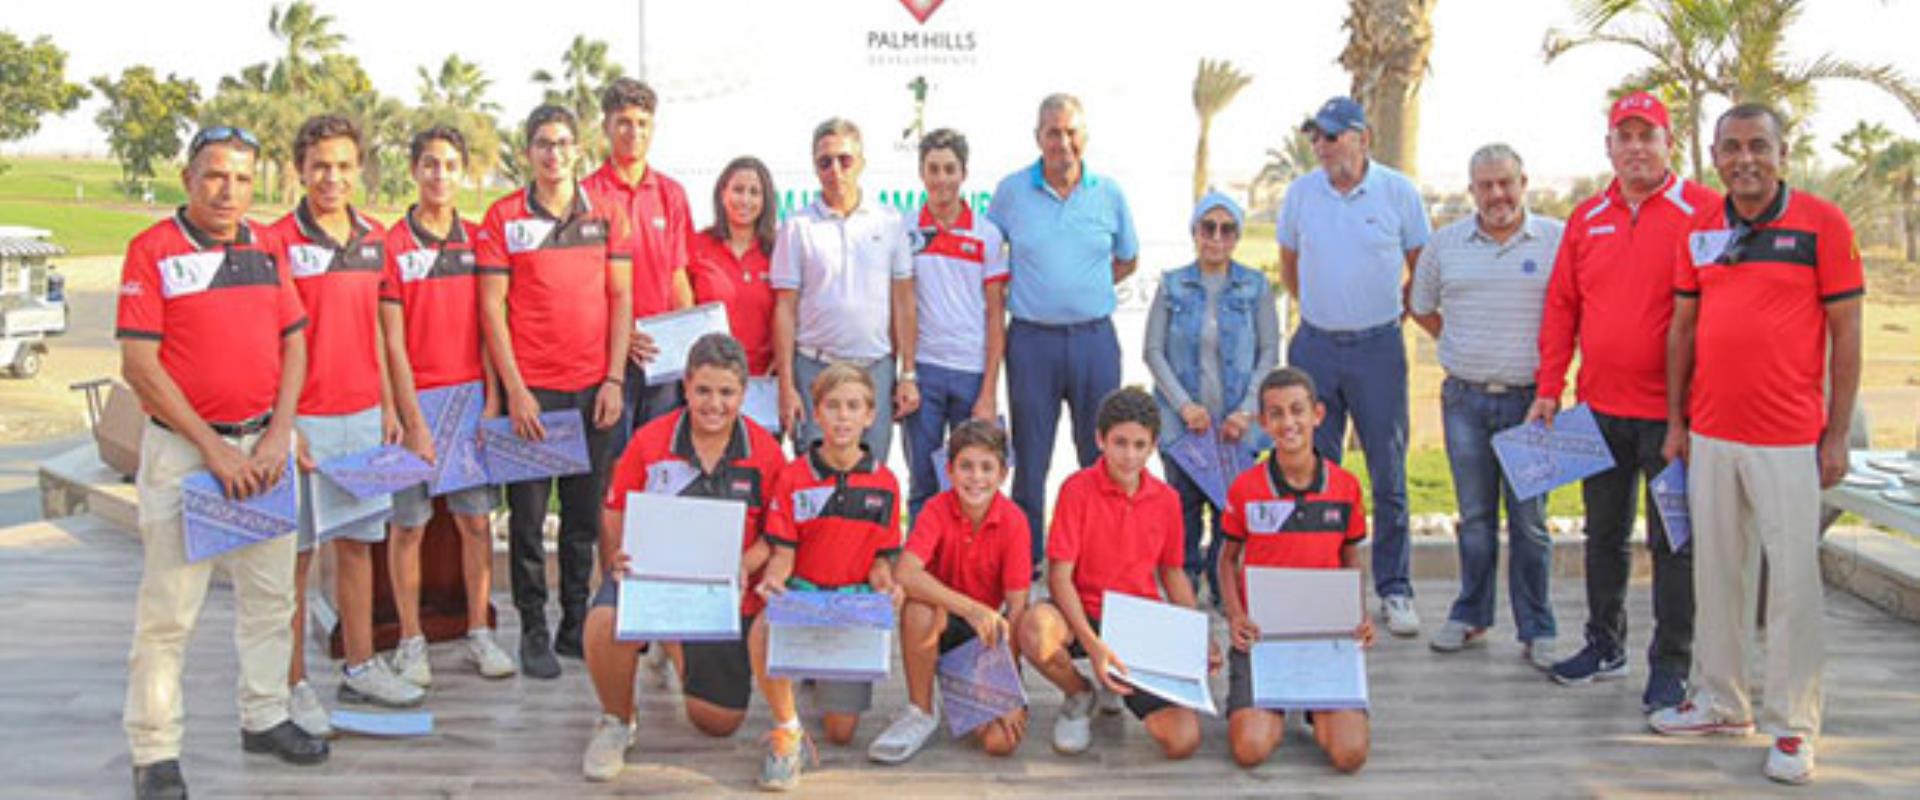 Junior Golf Team - Honoring the Federation motivates us for more victories